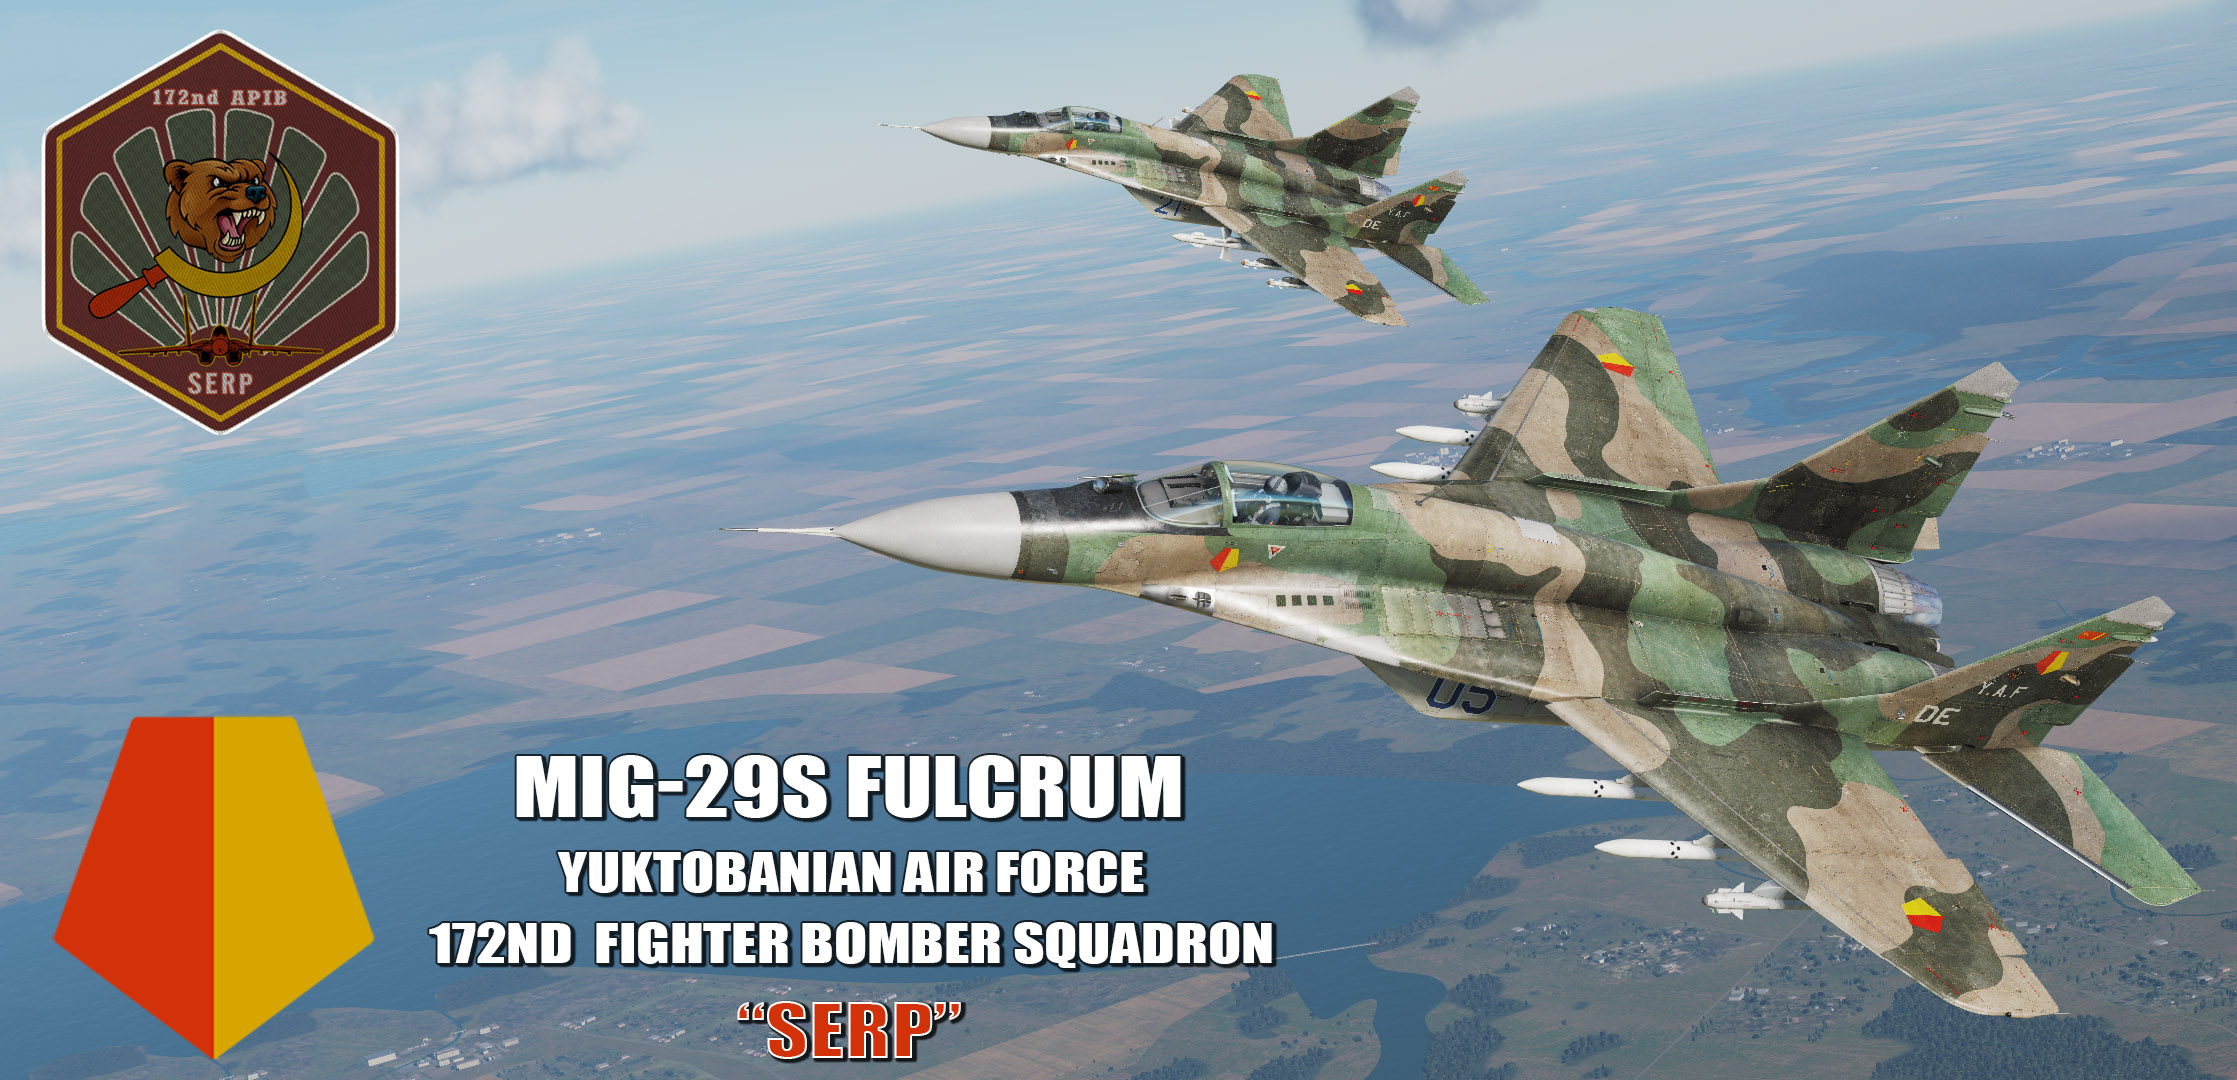 Ace Combat - Yuktobanian Air Force 172nd Fighter Bomber Squadron "Serp" MiG-29S Fulcrum